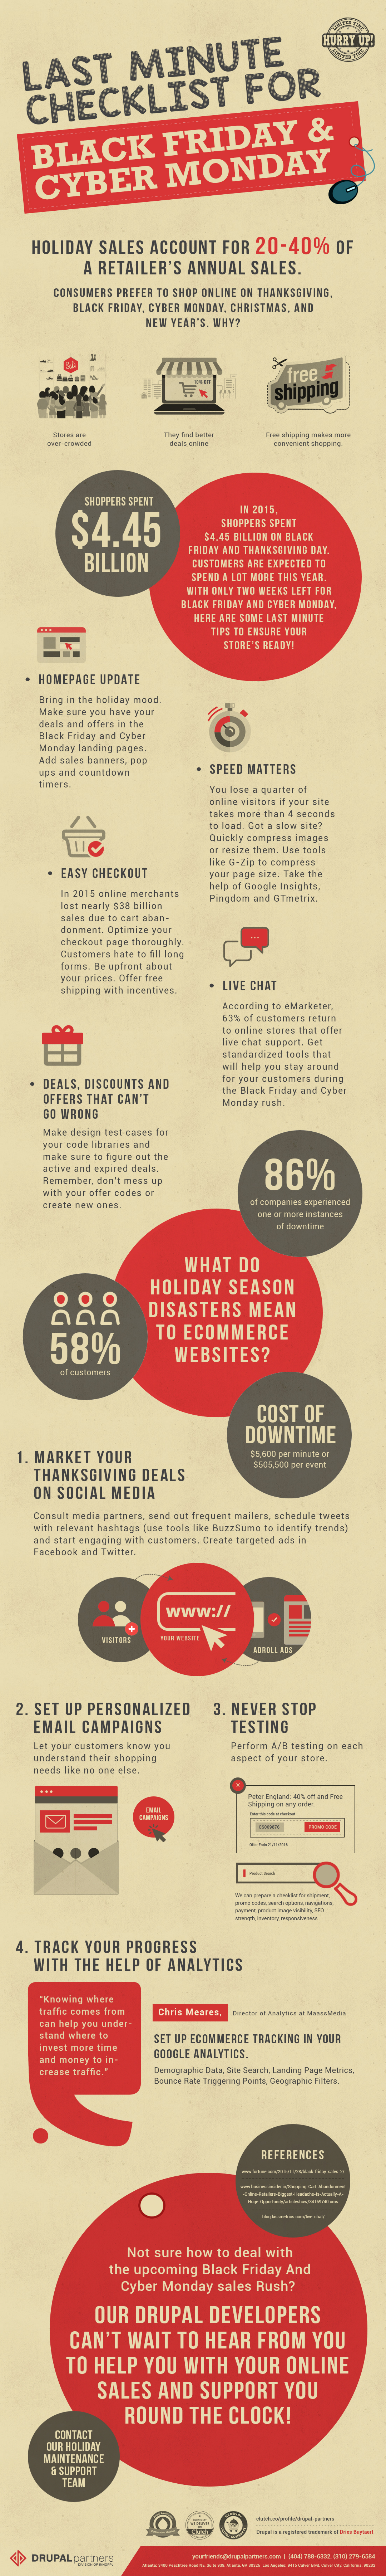 last-minute-checklist-for-black-friday-and-cyber-monday-infographic